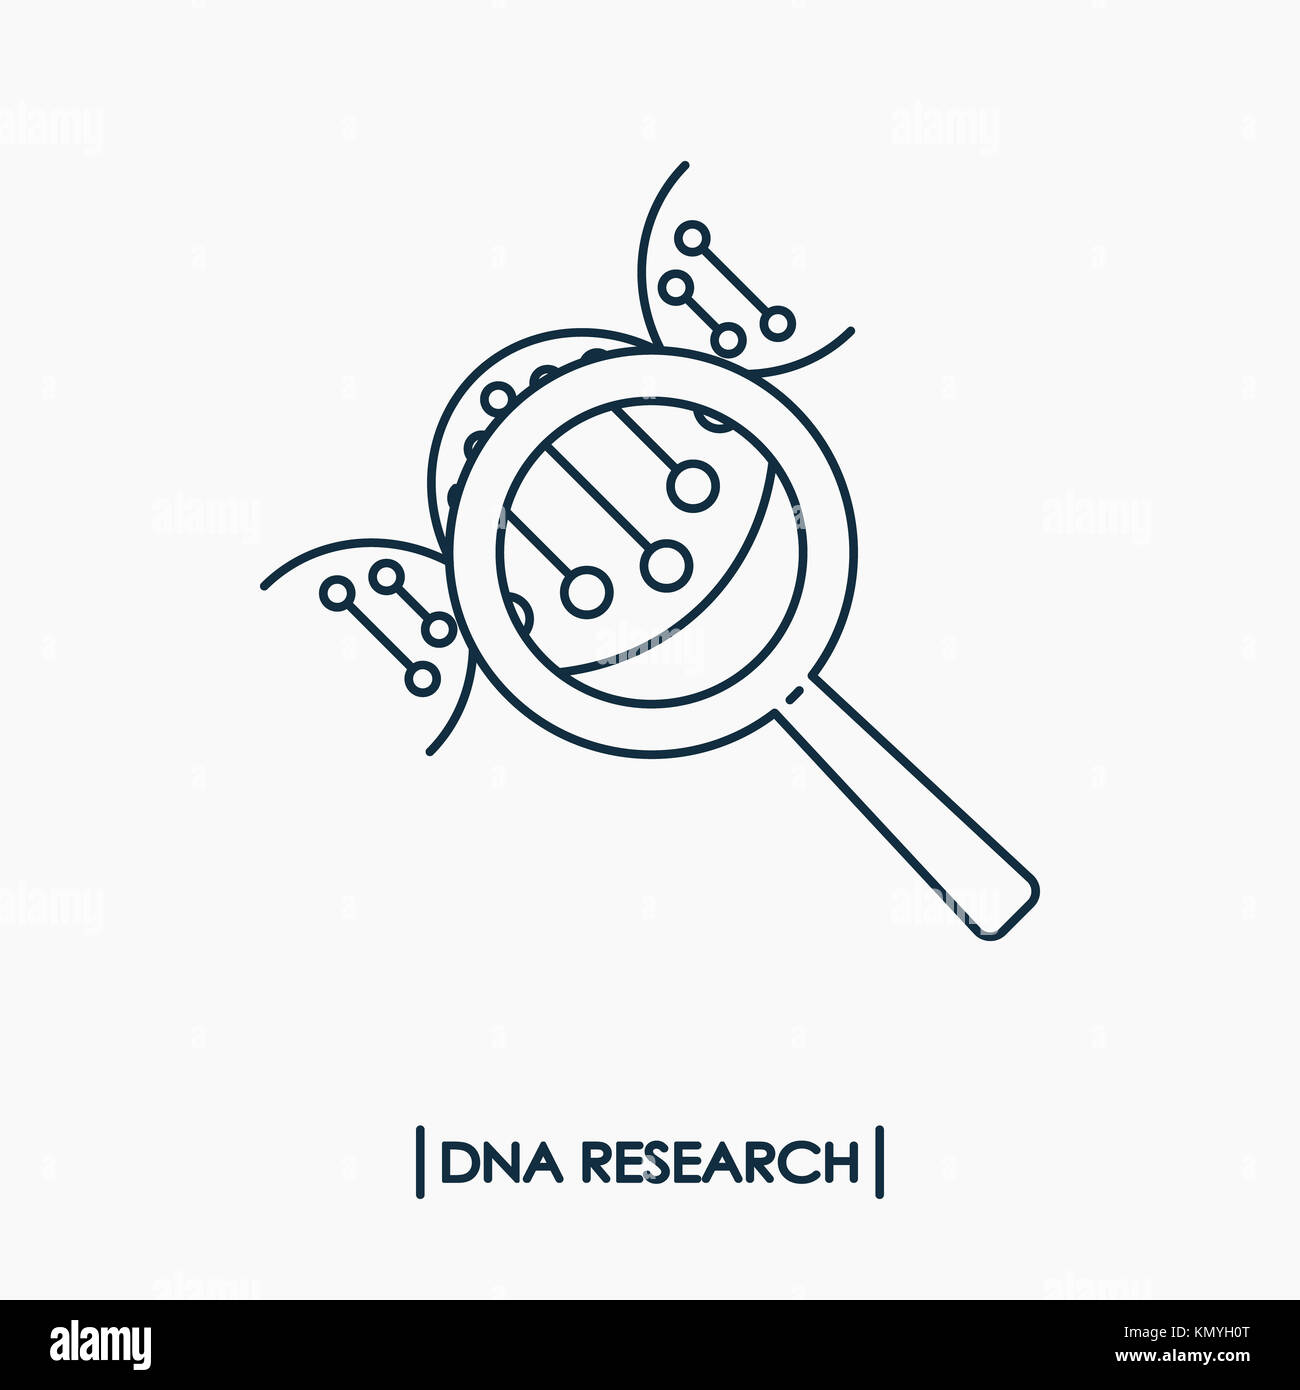 DNA research outline icon isolated. Molecule DNA with magnifier Stock Photo